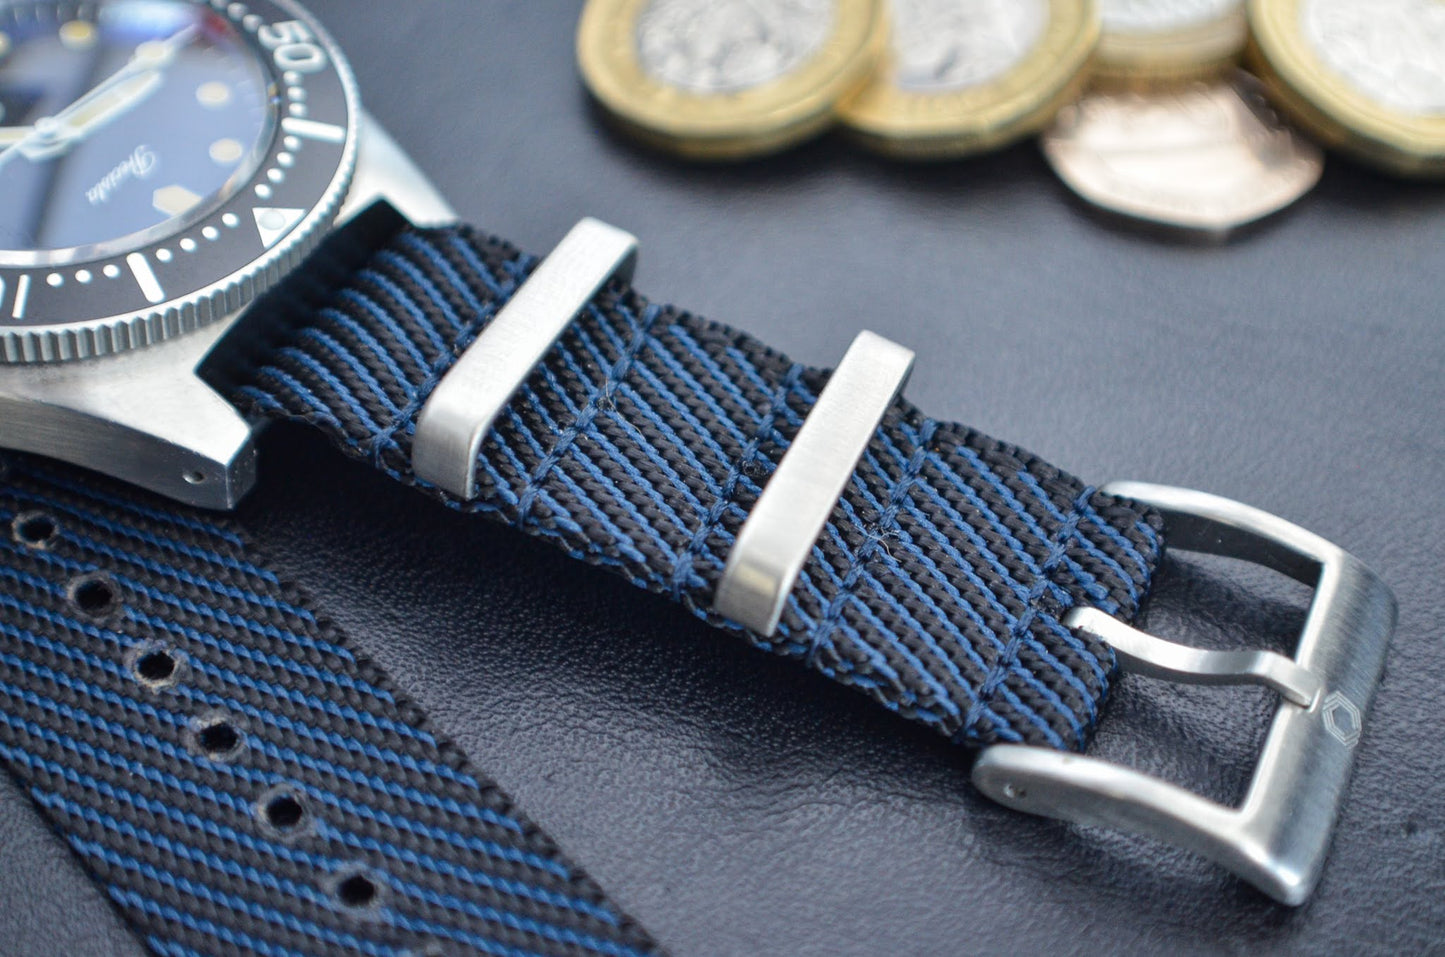 The 'Chatsworth' - Traditional blue military watch strap made of a soft double weaved nylon